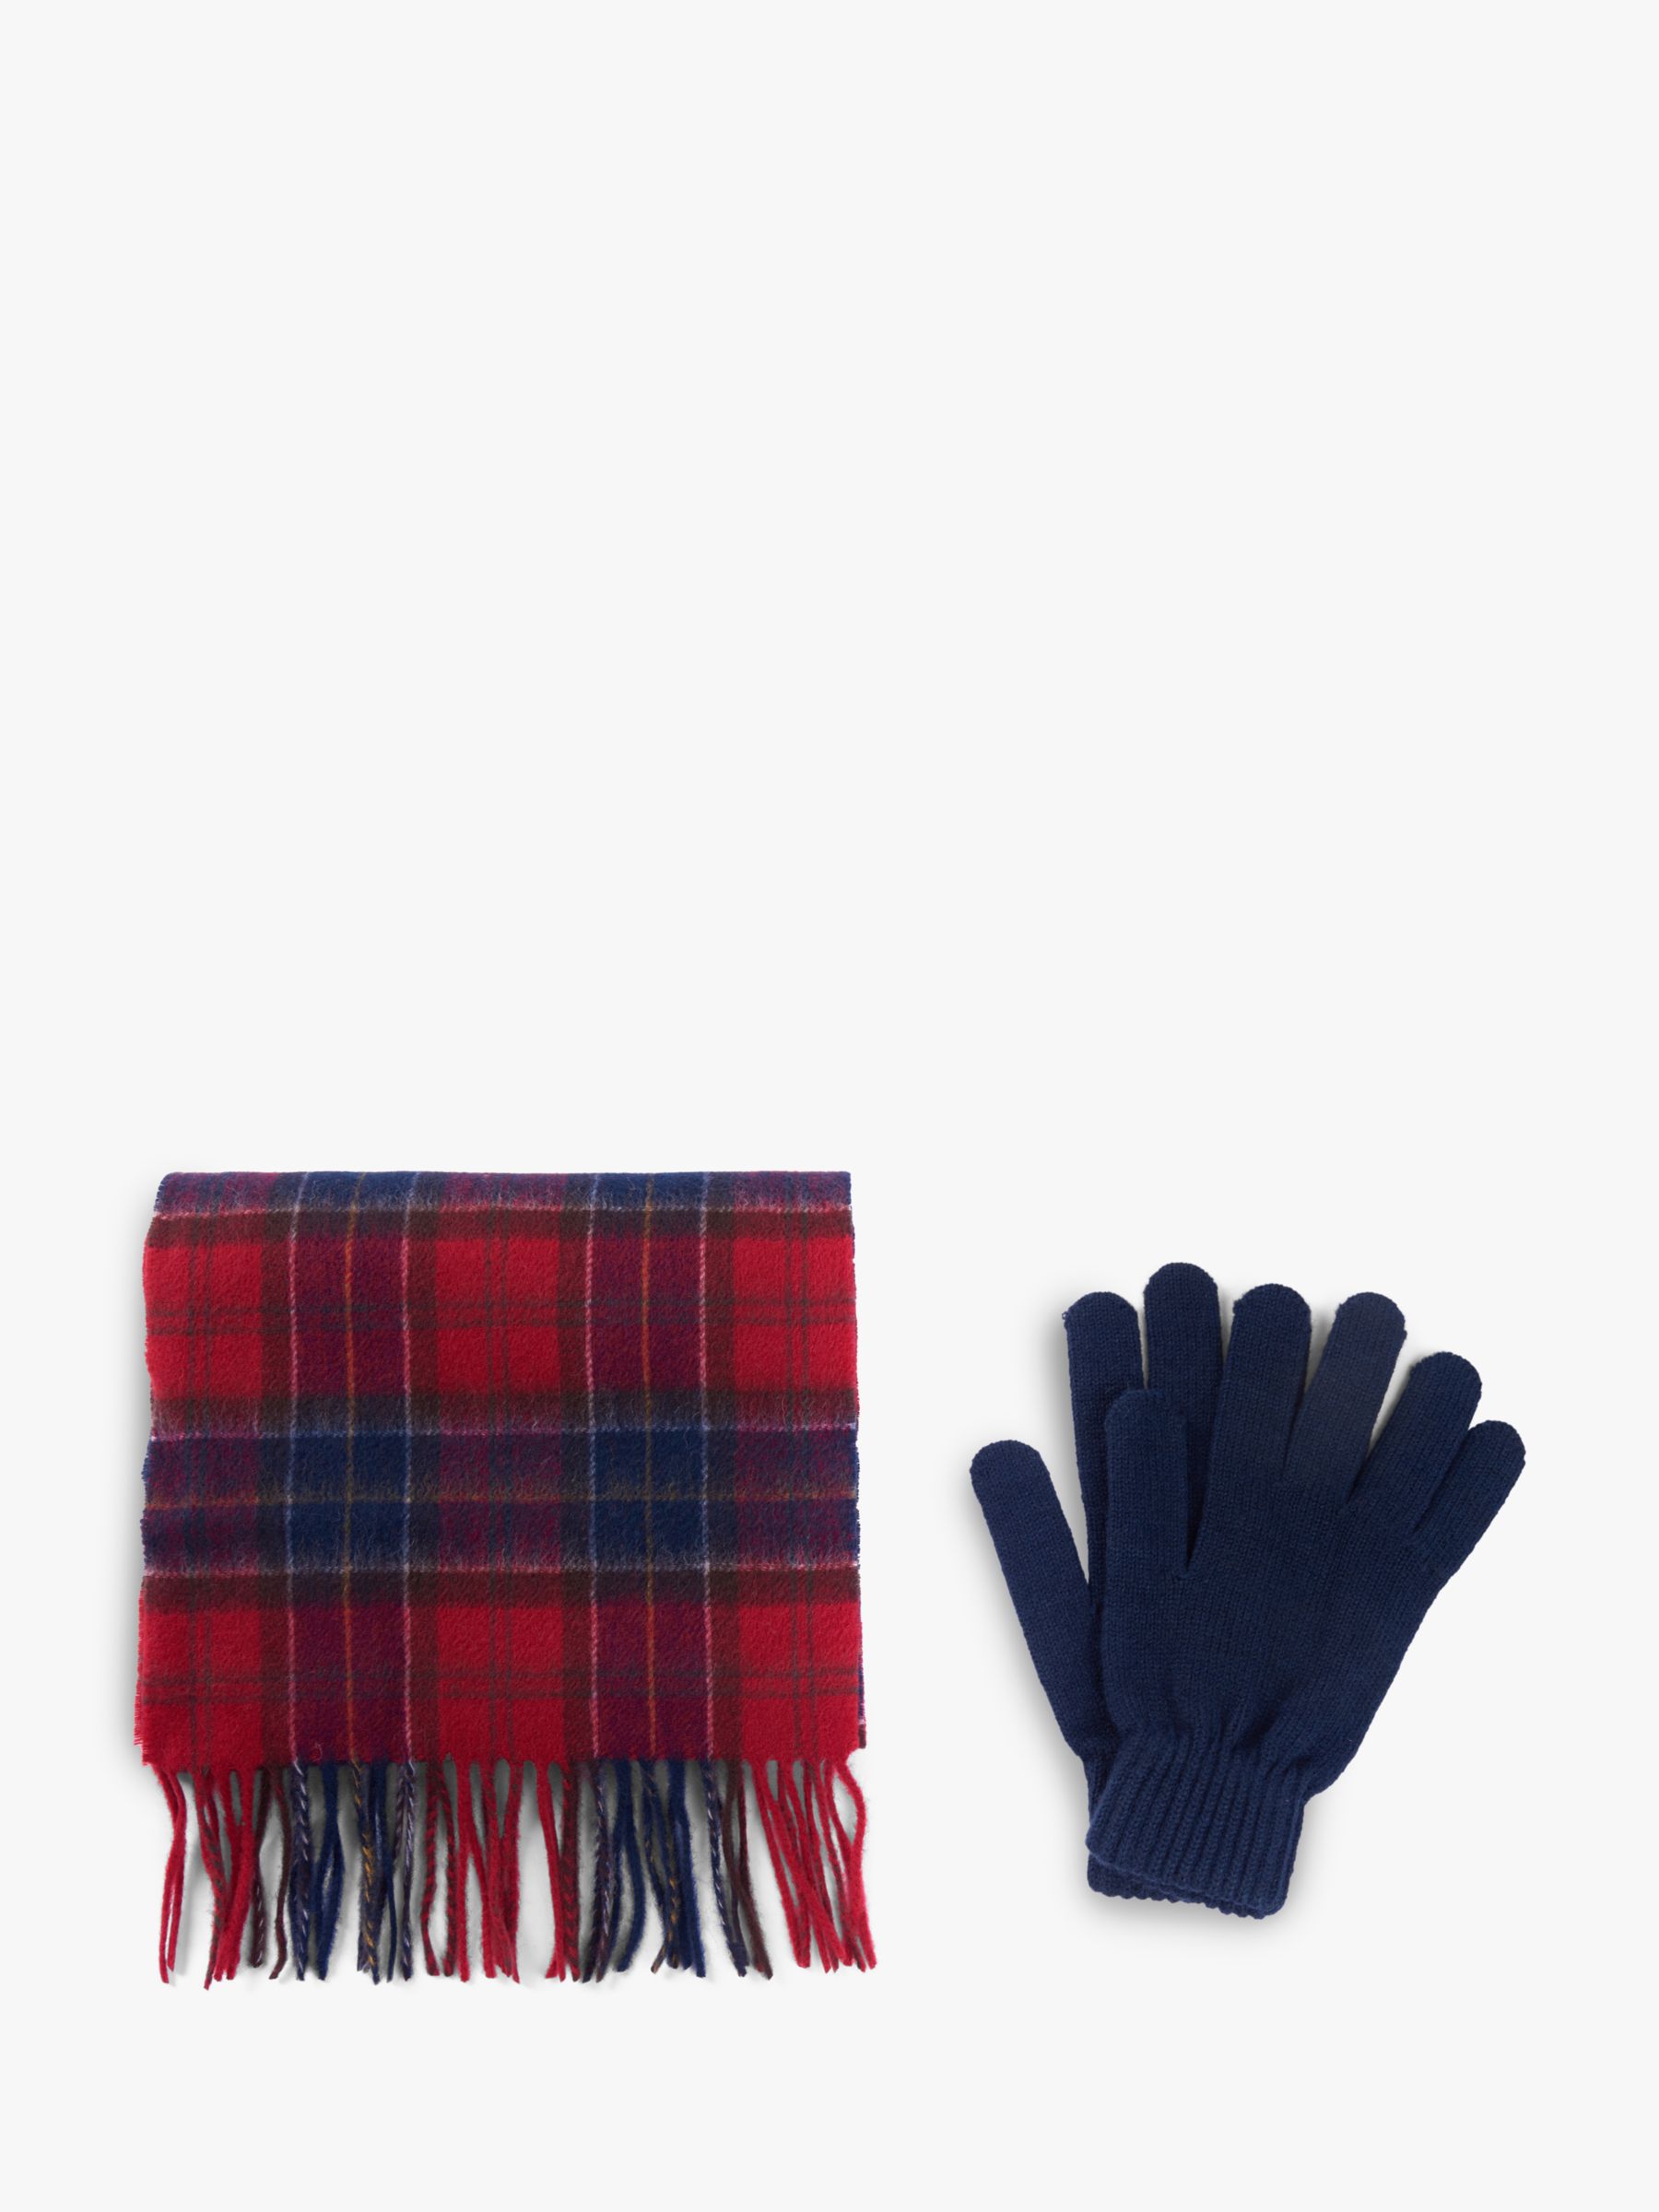 barbour scarf & glove gift set